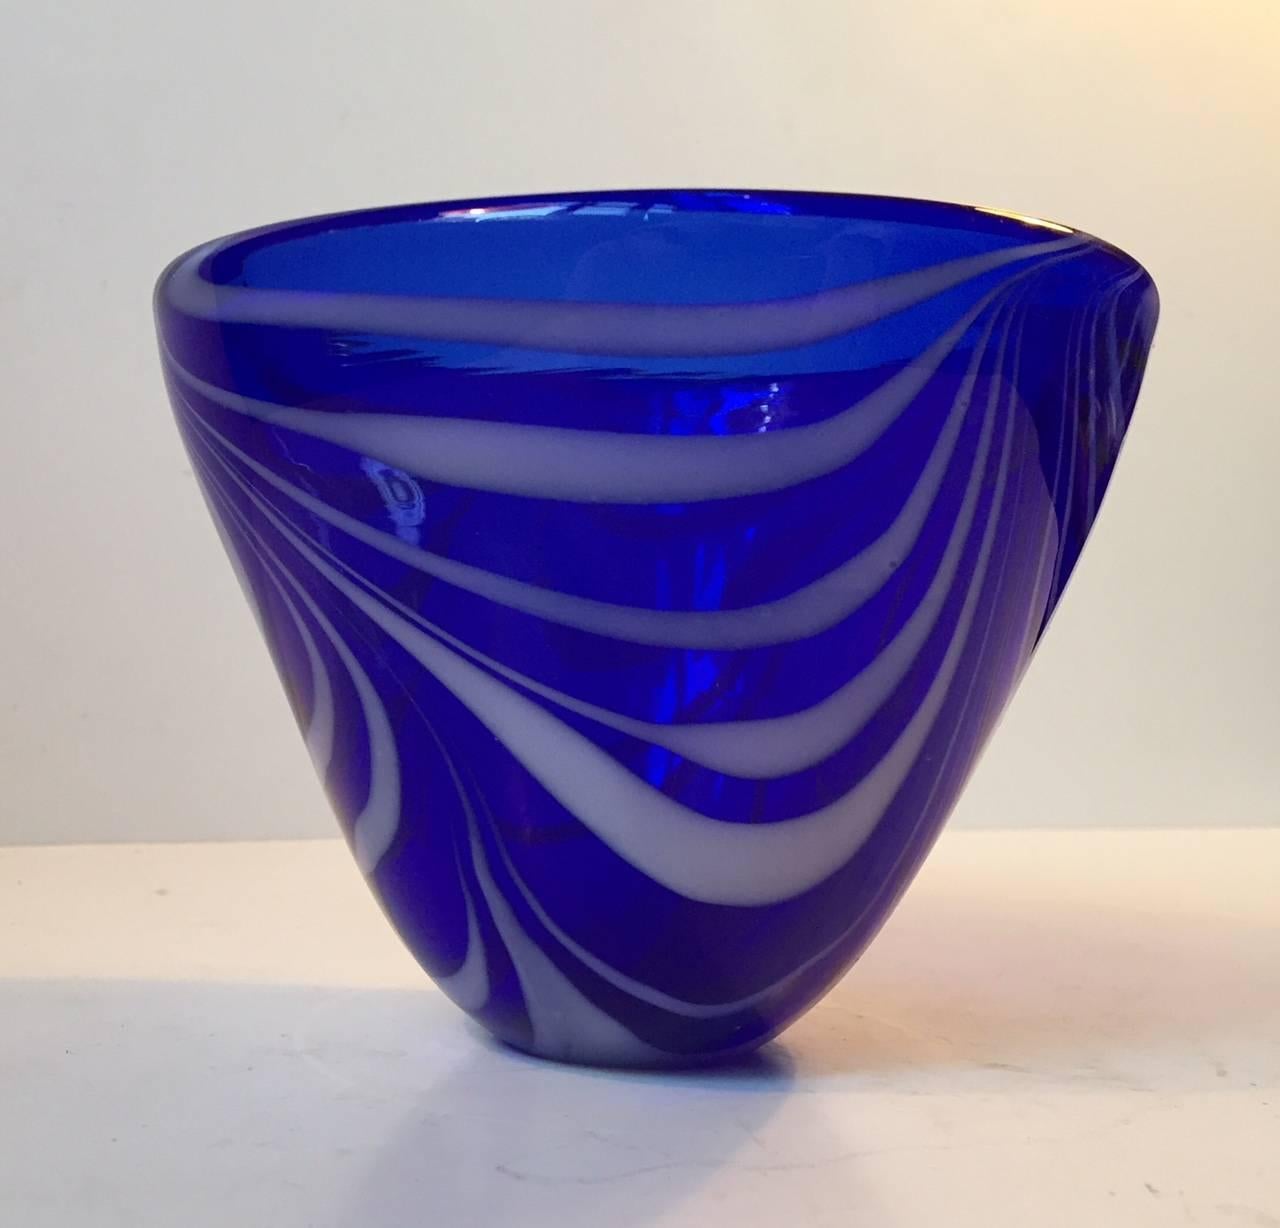 Thick cobalt blue conical glass bowl with white spiral/swirl decor og opaque glass. Manufactured by Holmegaard and designed by Torben Jørgensen in Denmark during the 1980s in a style reminiscent of Vicke Lindstrand.